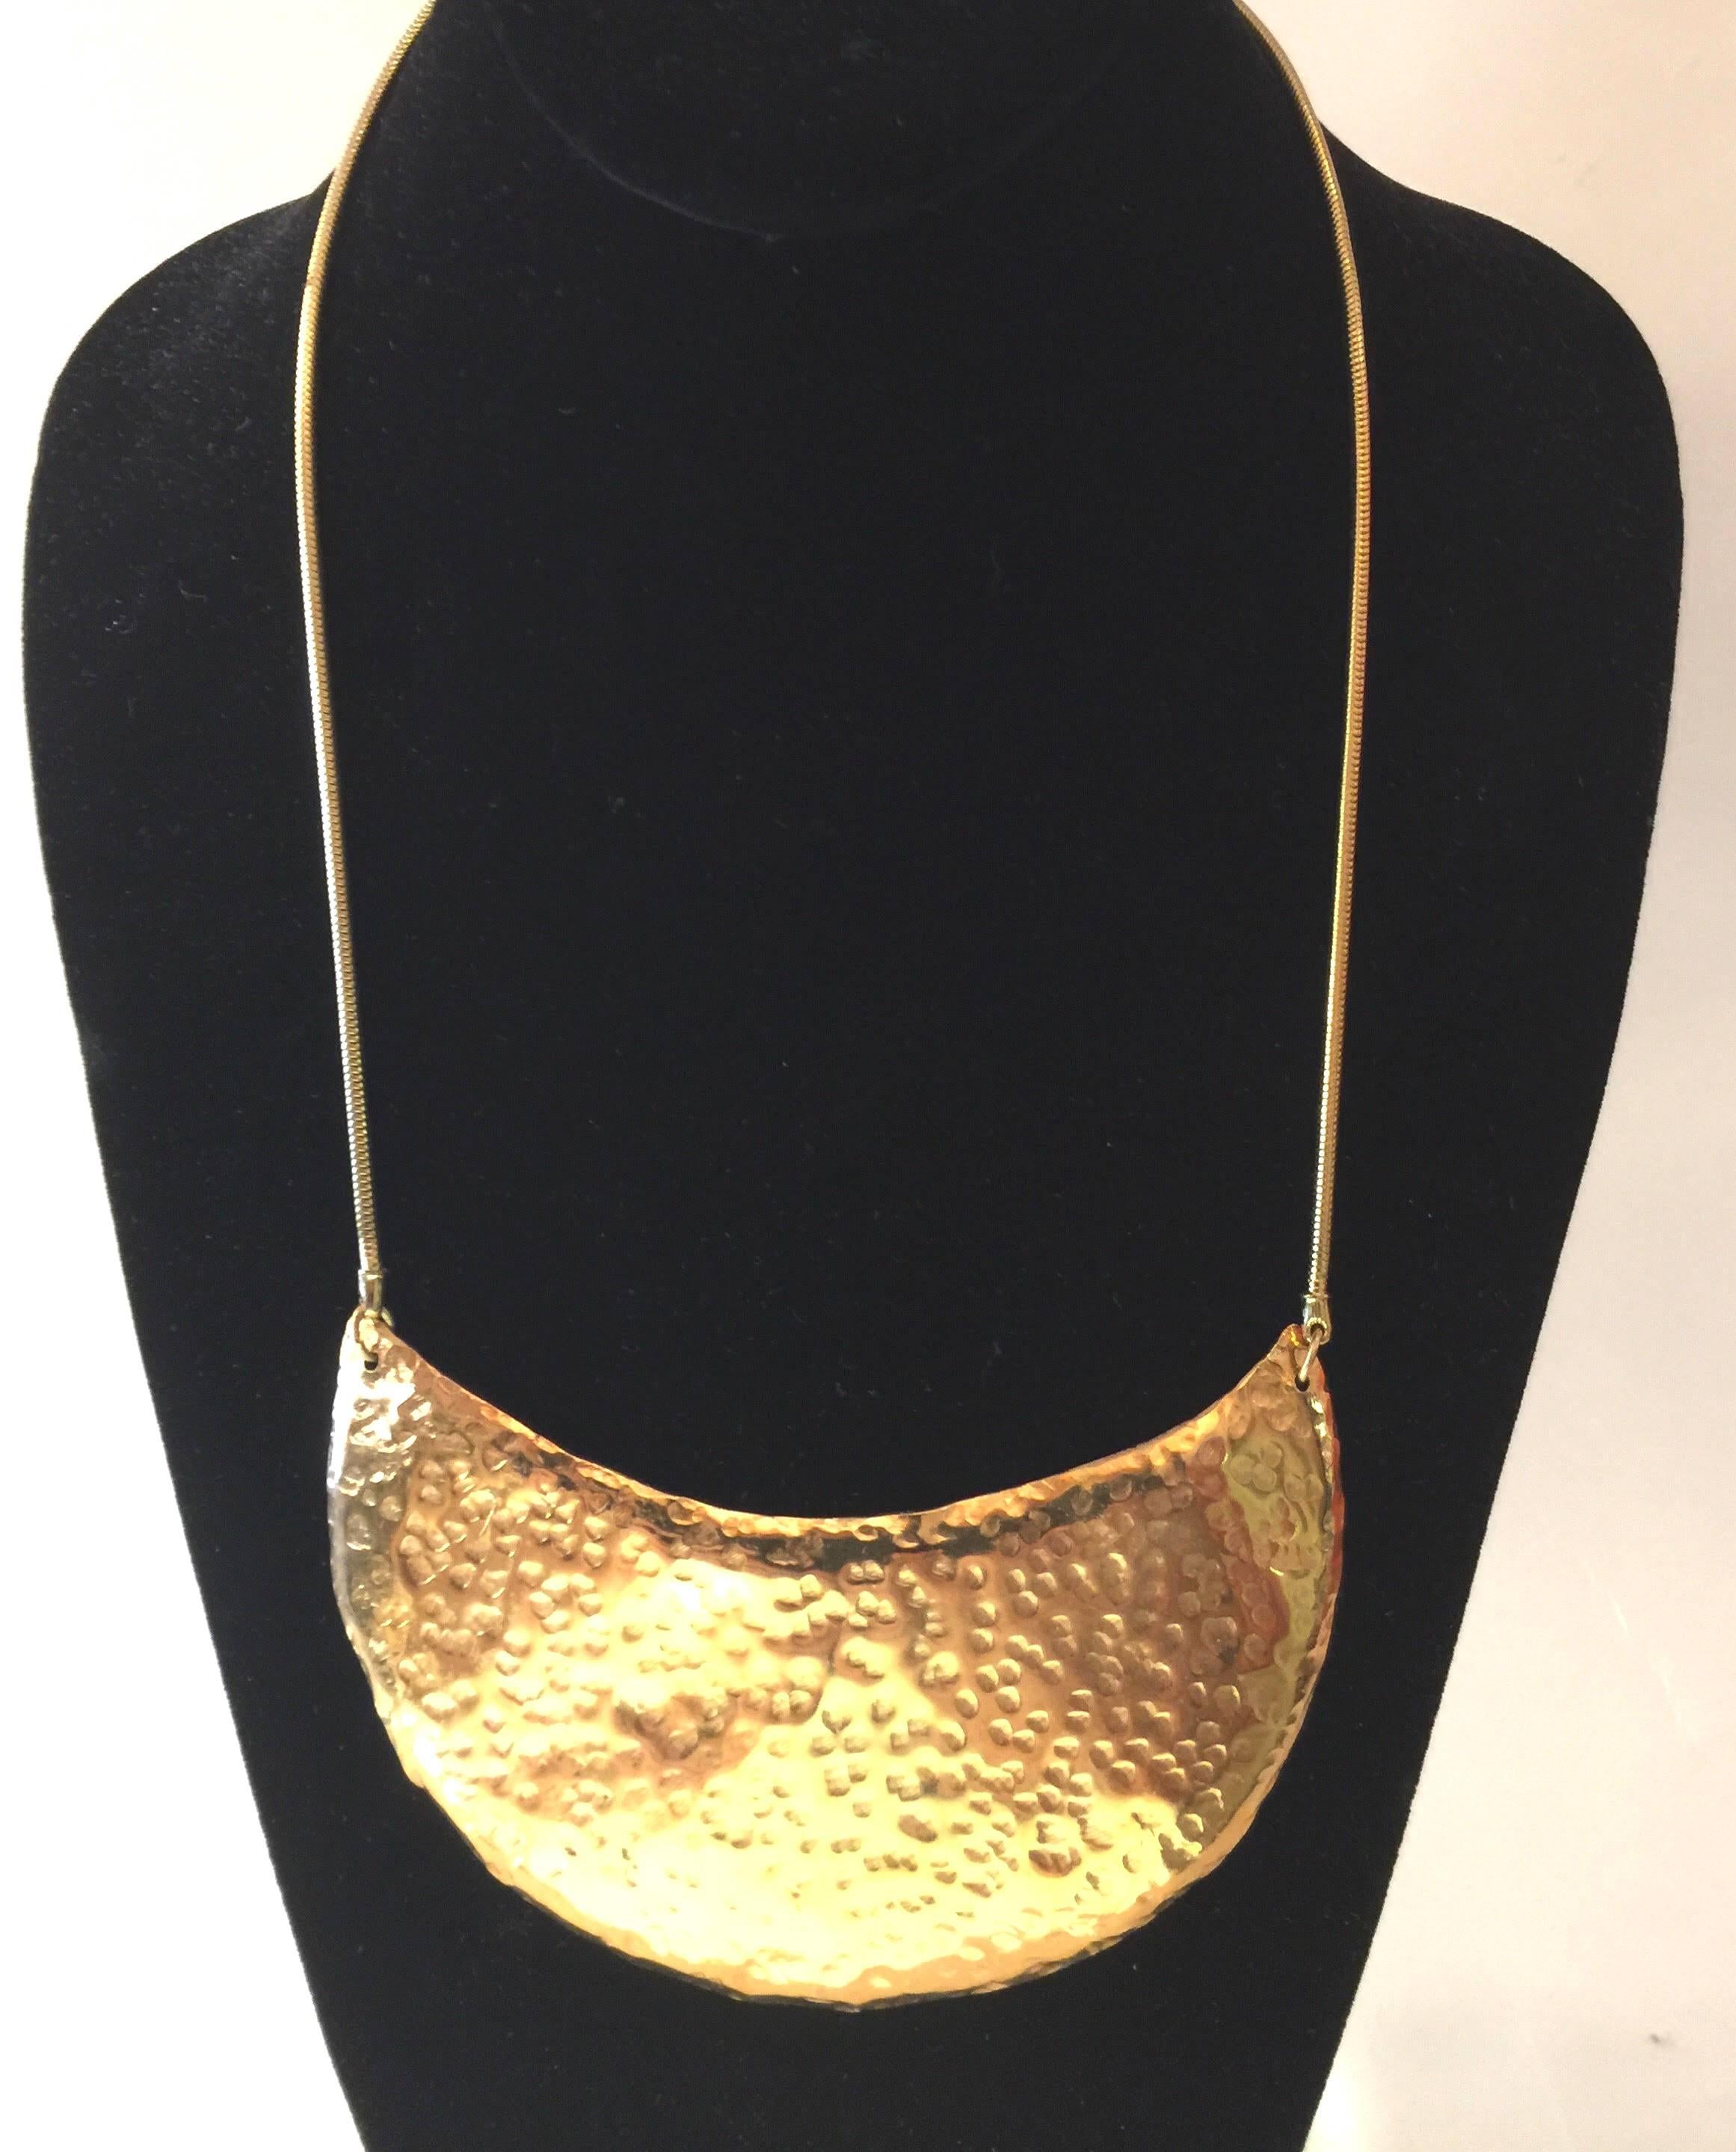 1970s DeLillo Hammered Brass Modernist Breastplate Necklace In Excellent Condition For Sale In Palm Springs, CA